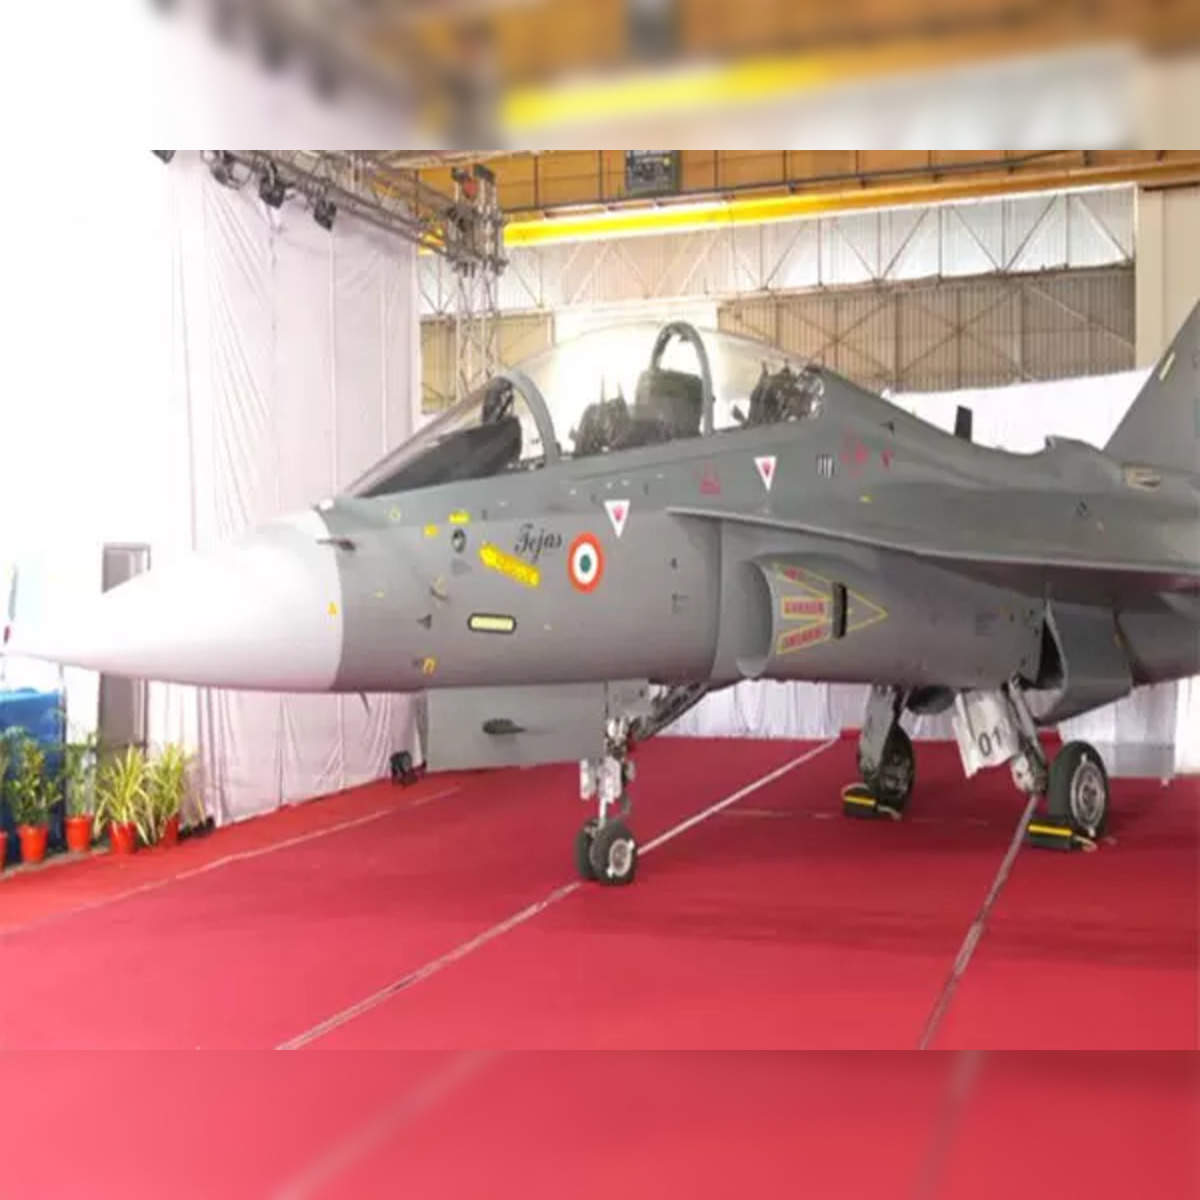 Leap of technology: HAL to launch unmanned fighter jet